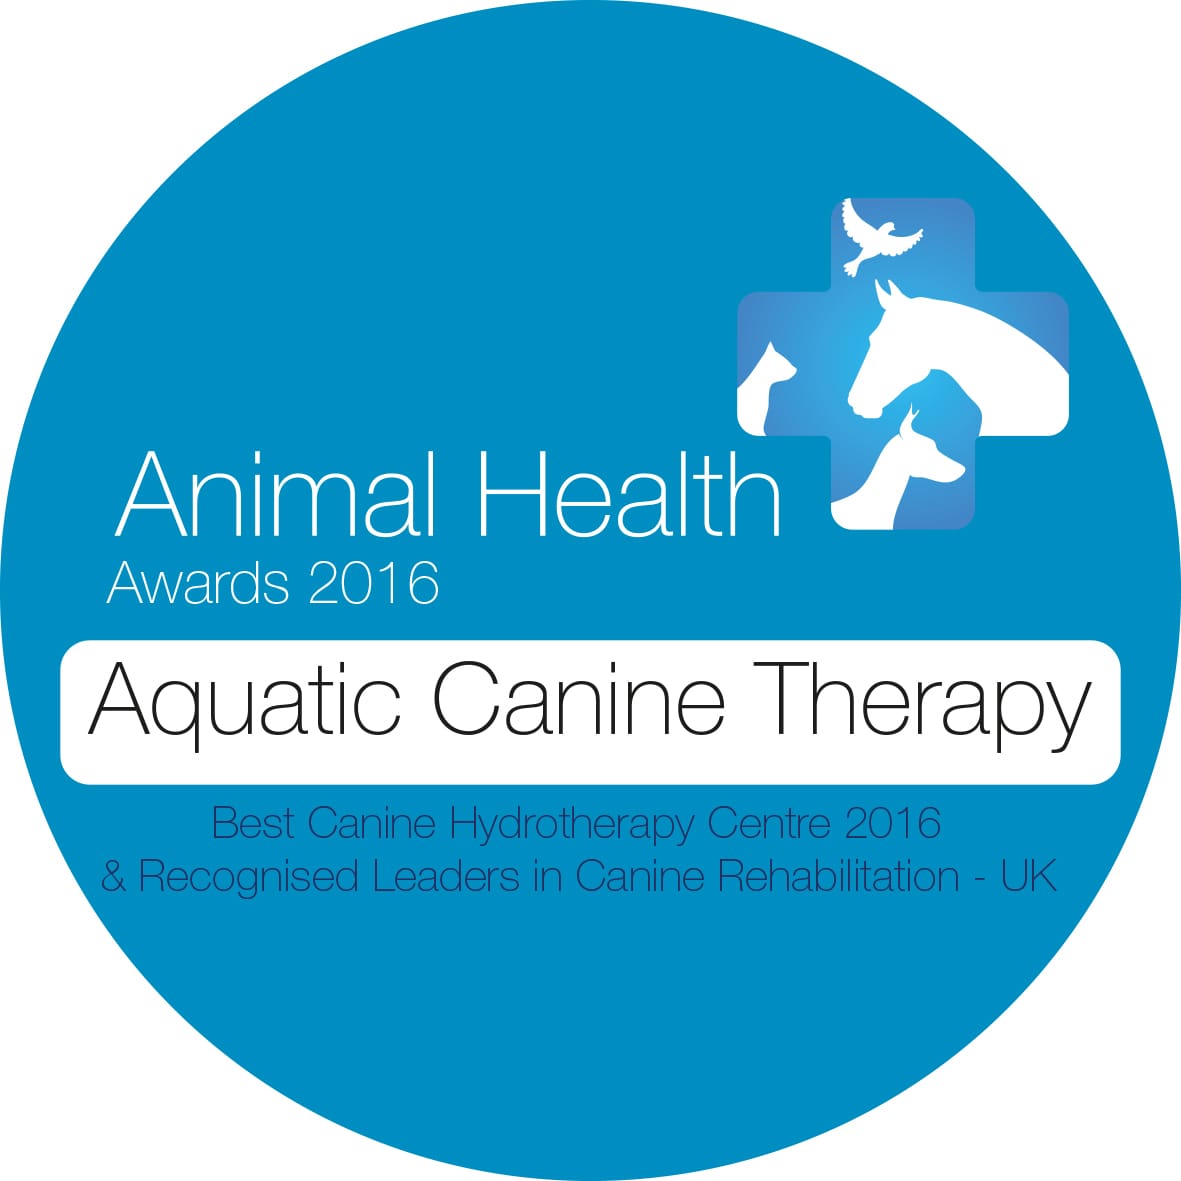 This is the animal health award 2016 for Aquatic Canine Therapy